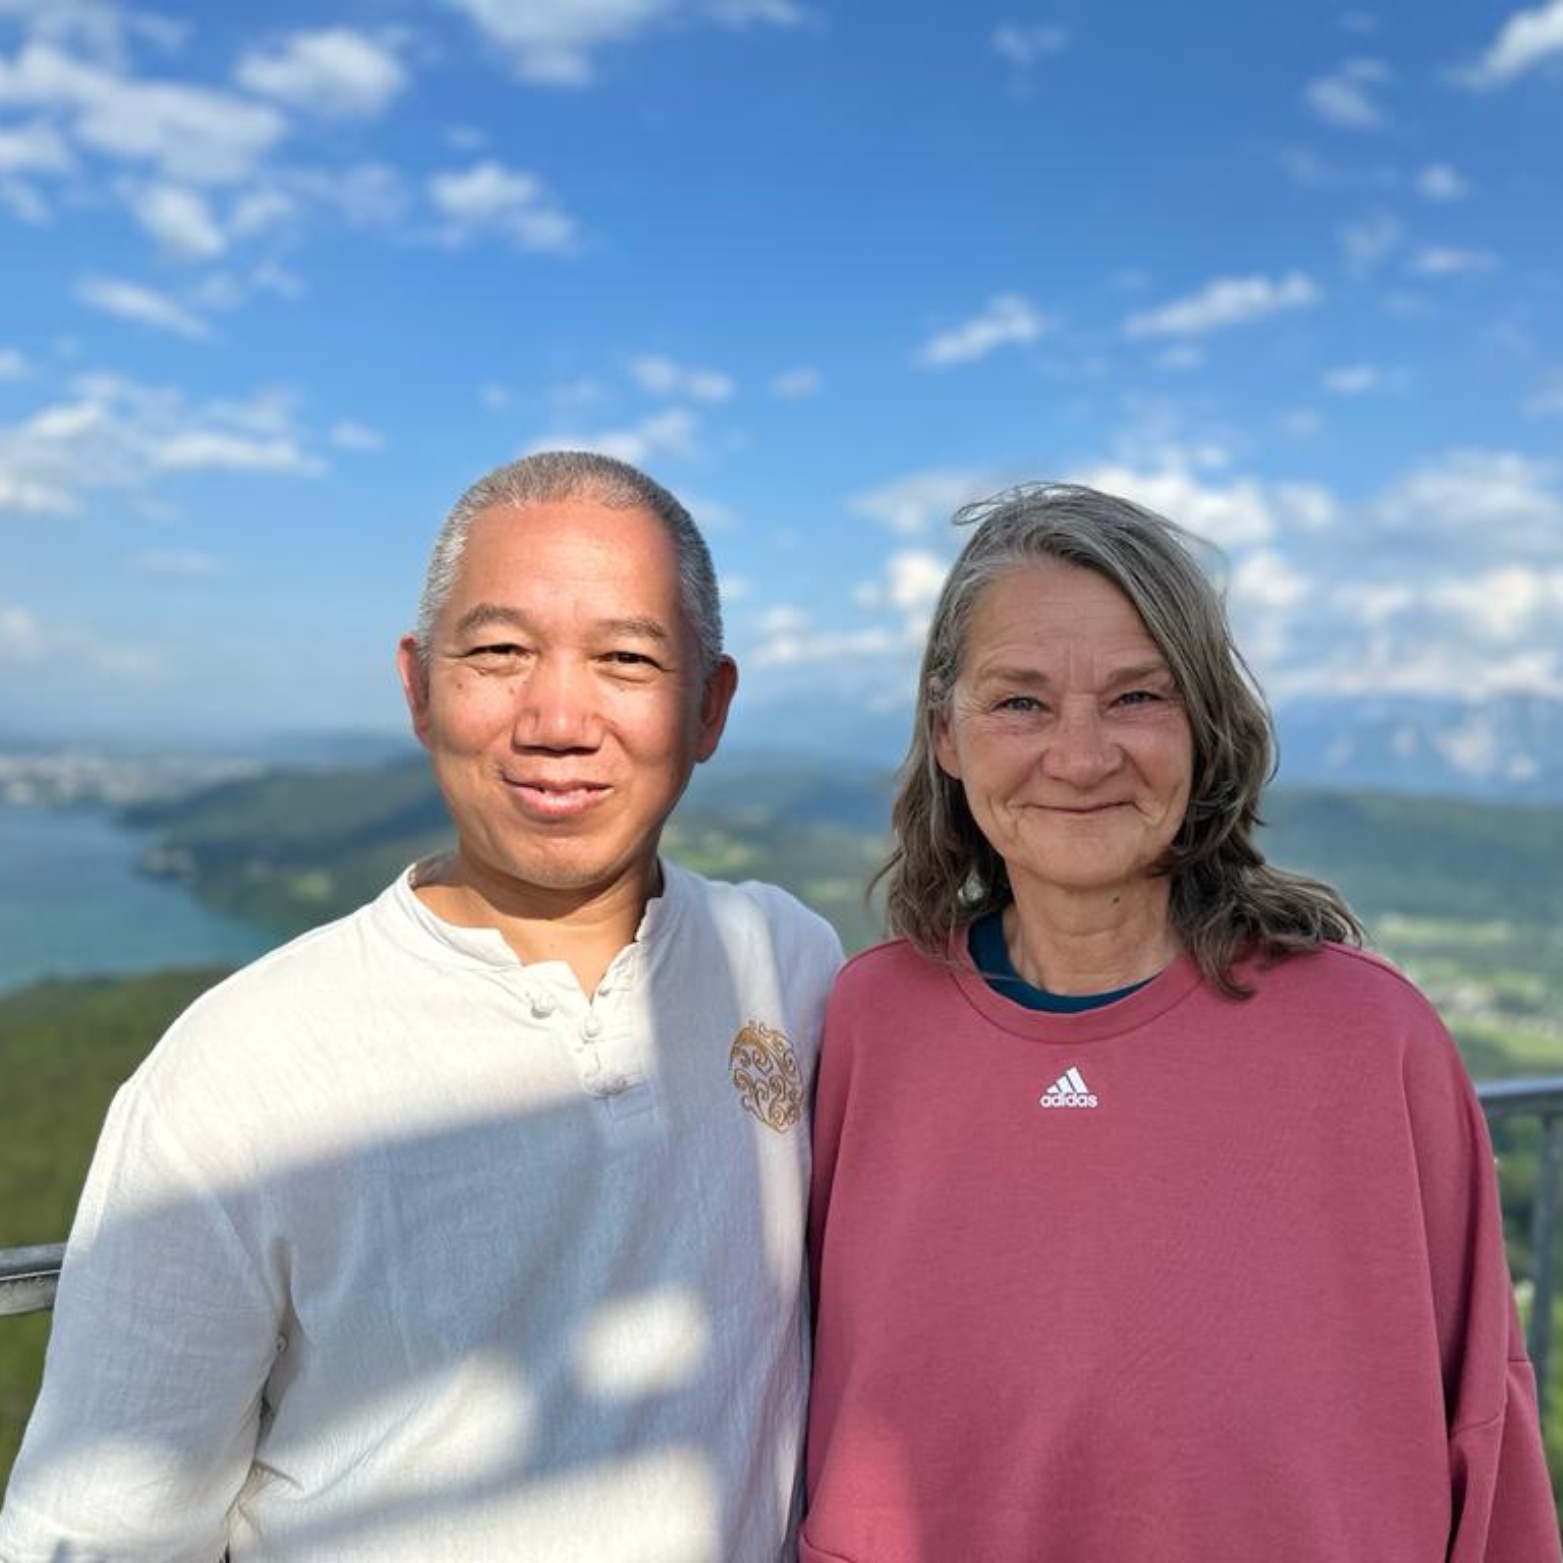 picture of Master Yuantong Liu and Britta Stalling in Austria beautiful scenery